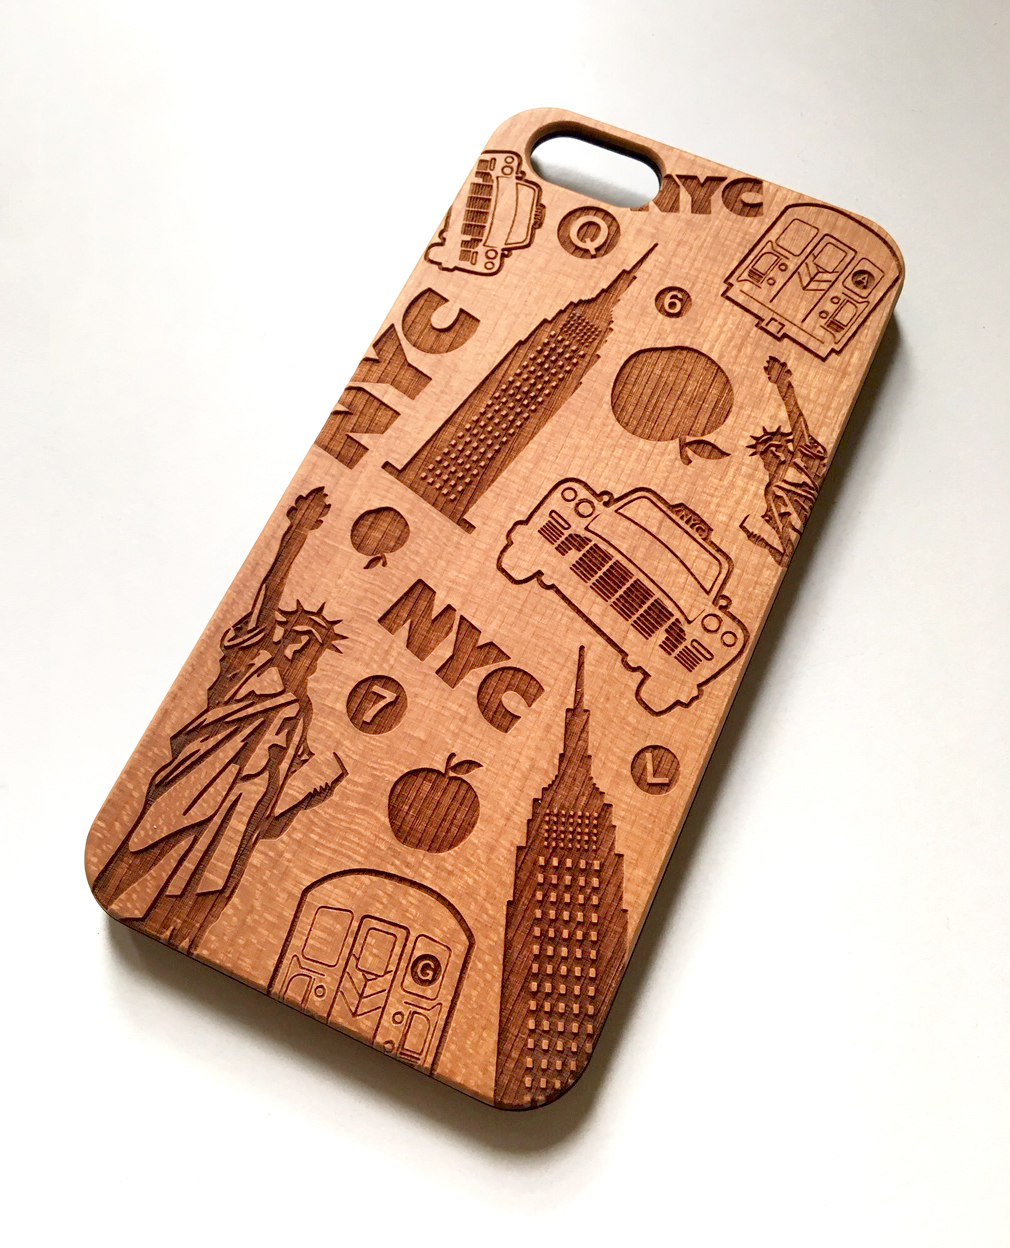 nyc laser cut Phone Cases iphone wood cases Laser Engraved laser etched wood engraved cases